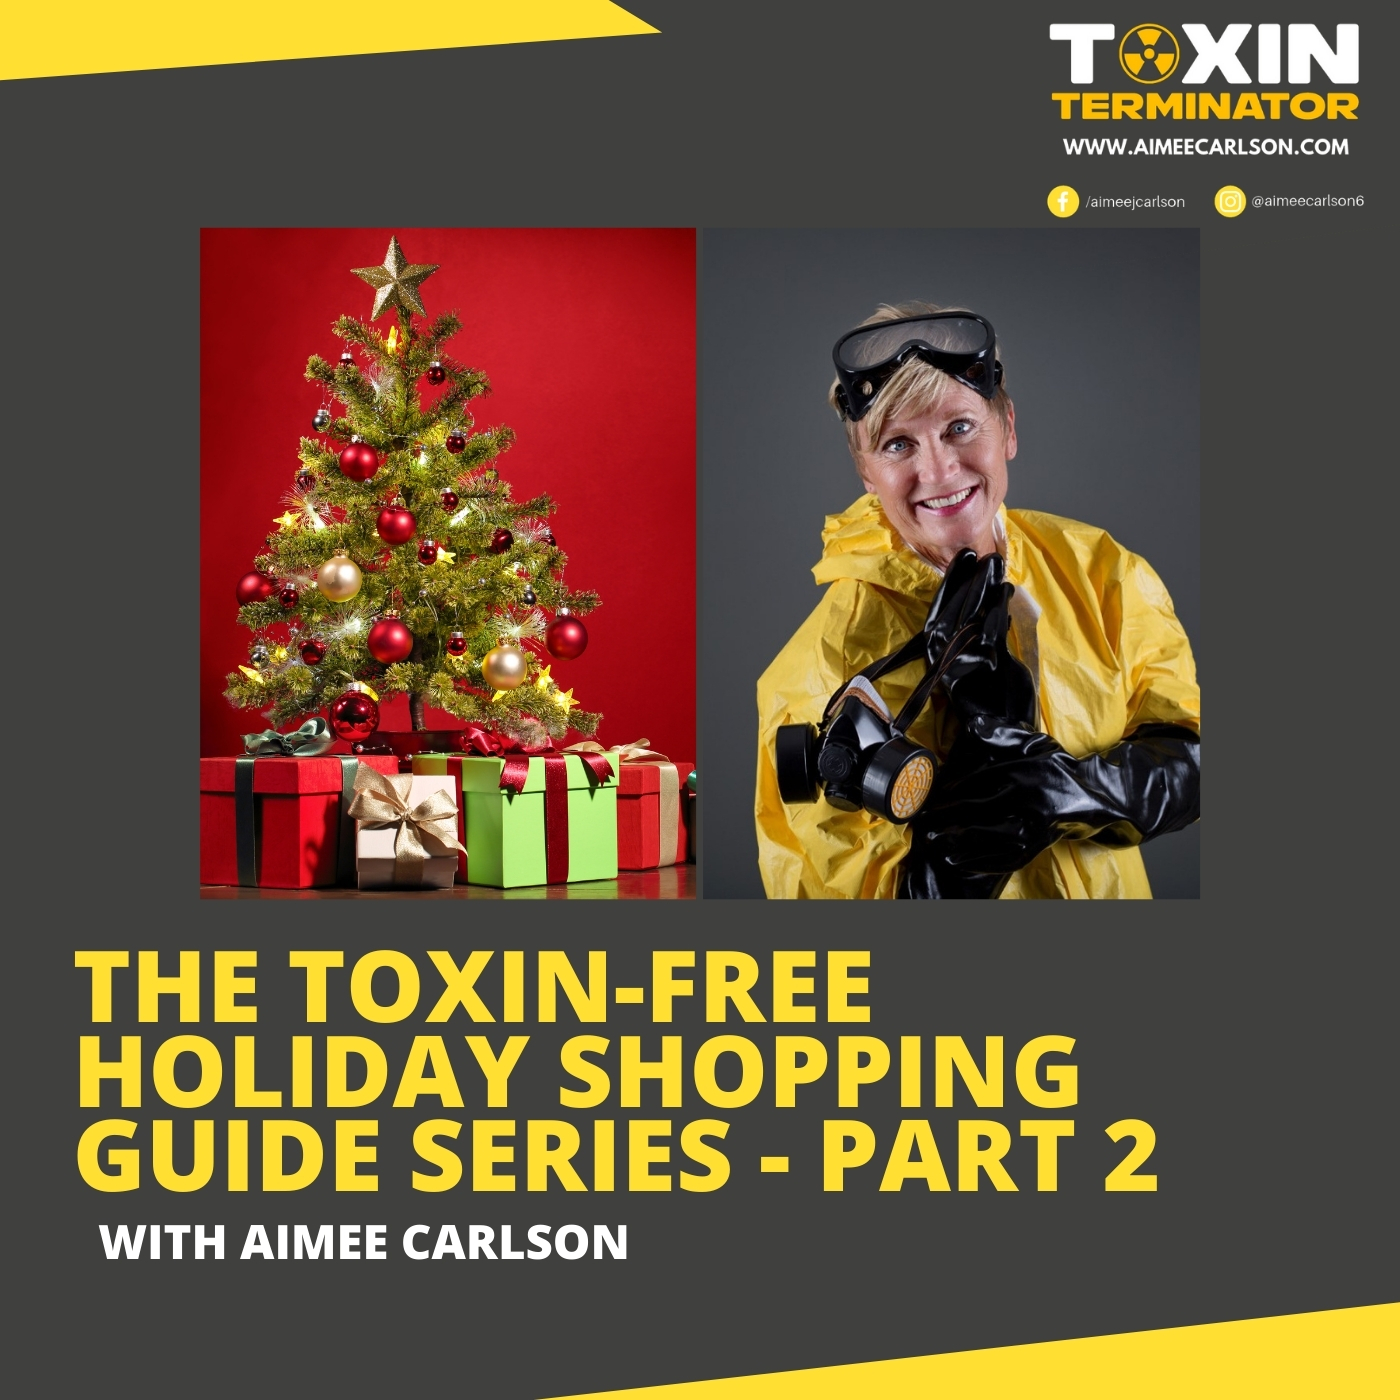 The Toxin-Free Holiday Shopping Guide Series - Part 2